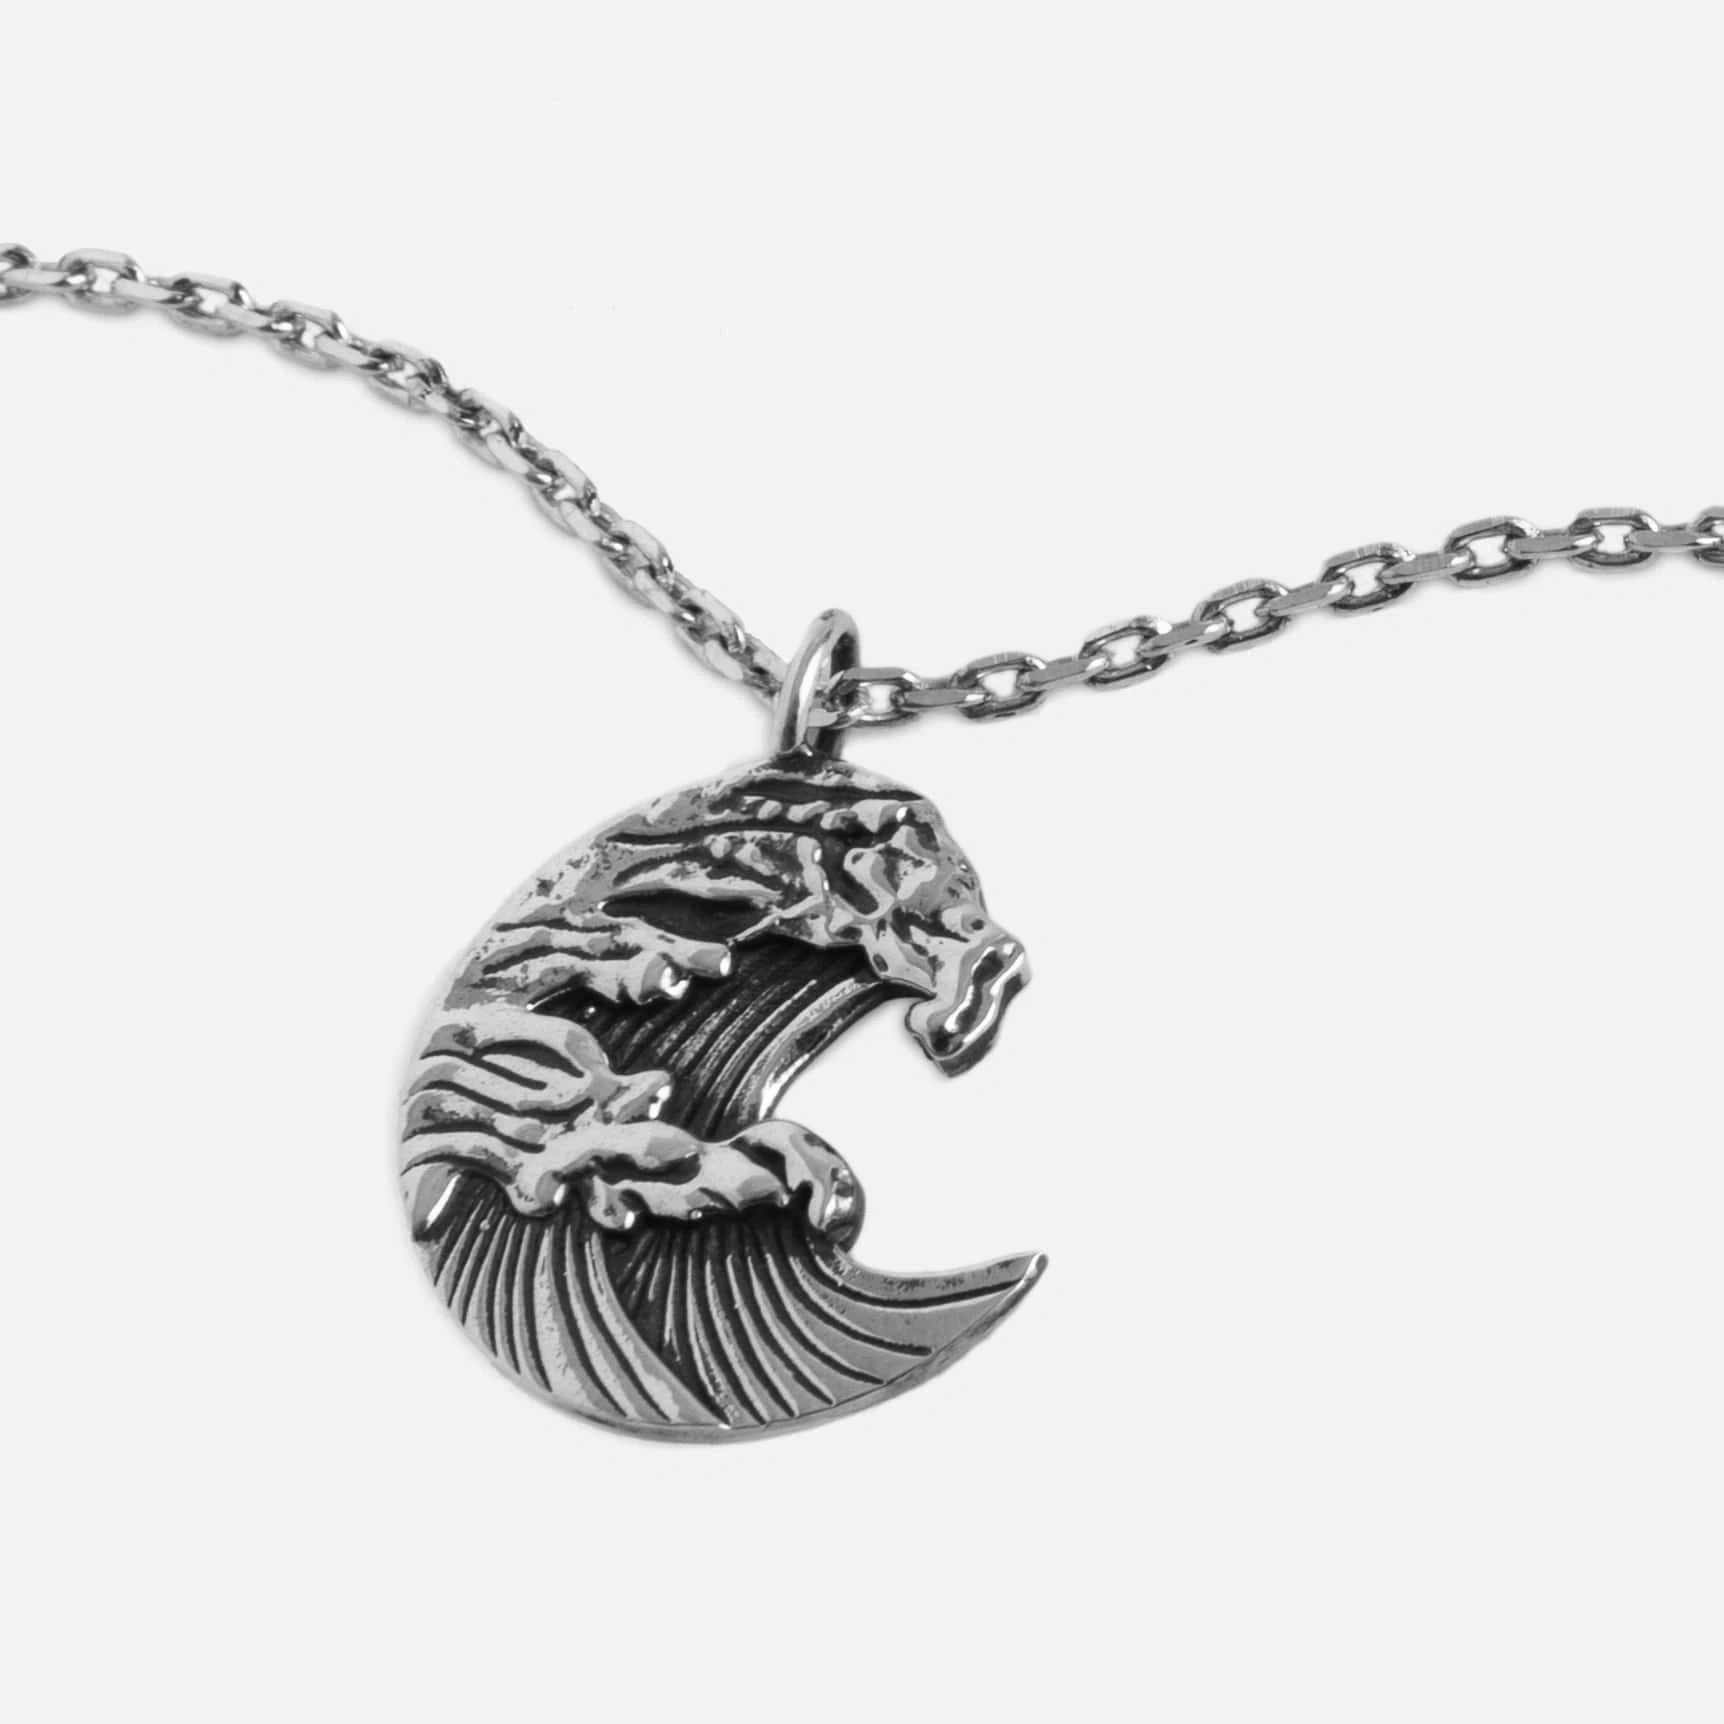 The Great Wave Necklace